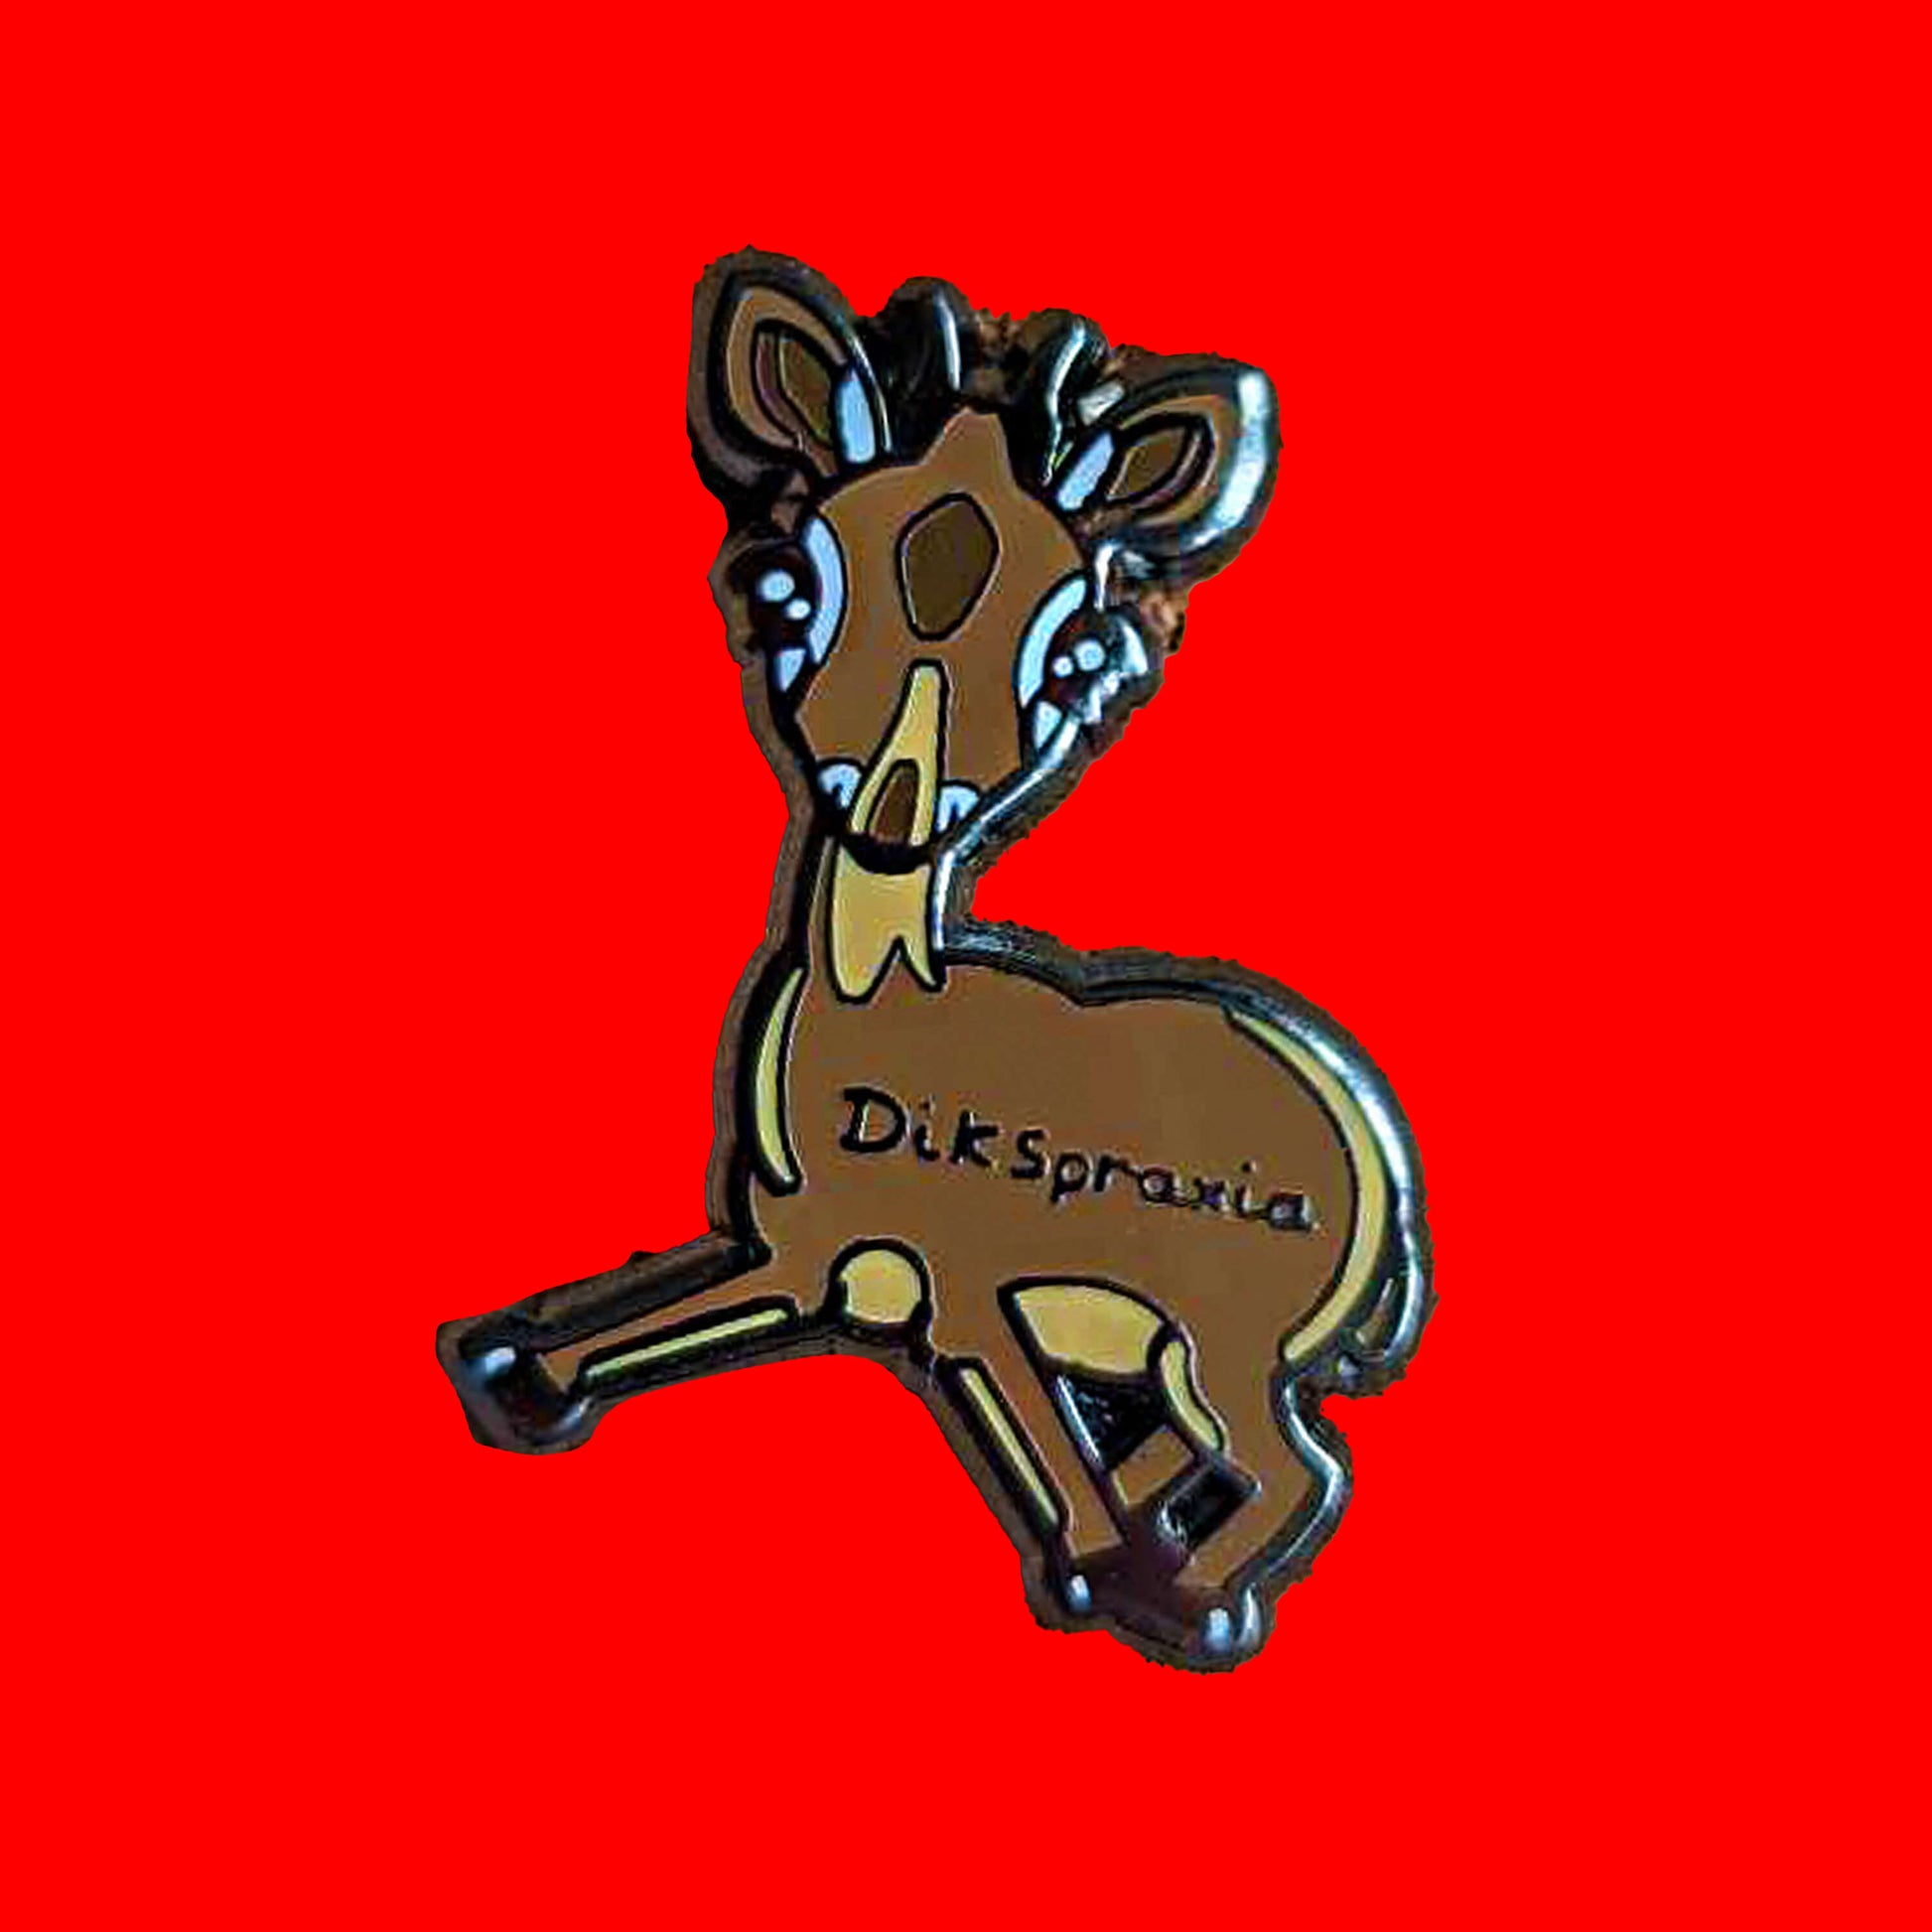 The Dikspraxia Enamel Pin - Dyspraxia on a red background. The brown dik dik antelope shaped enamel pin has its two front legs splayed chaotically with black text reading 'dikspraxia' across its middle. The design is raising awareness for dyspraxia and neurodivergence.